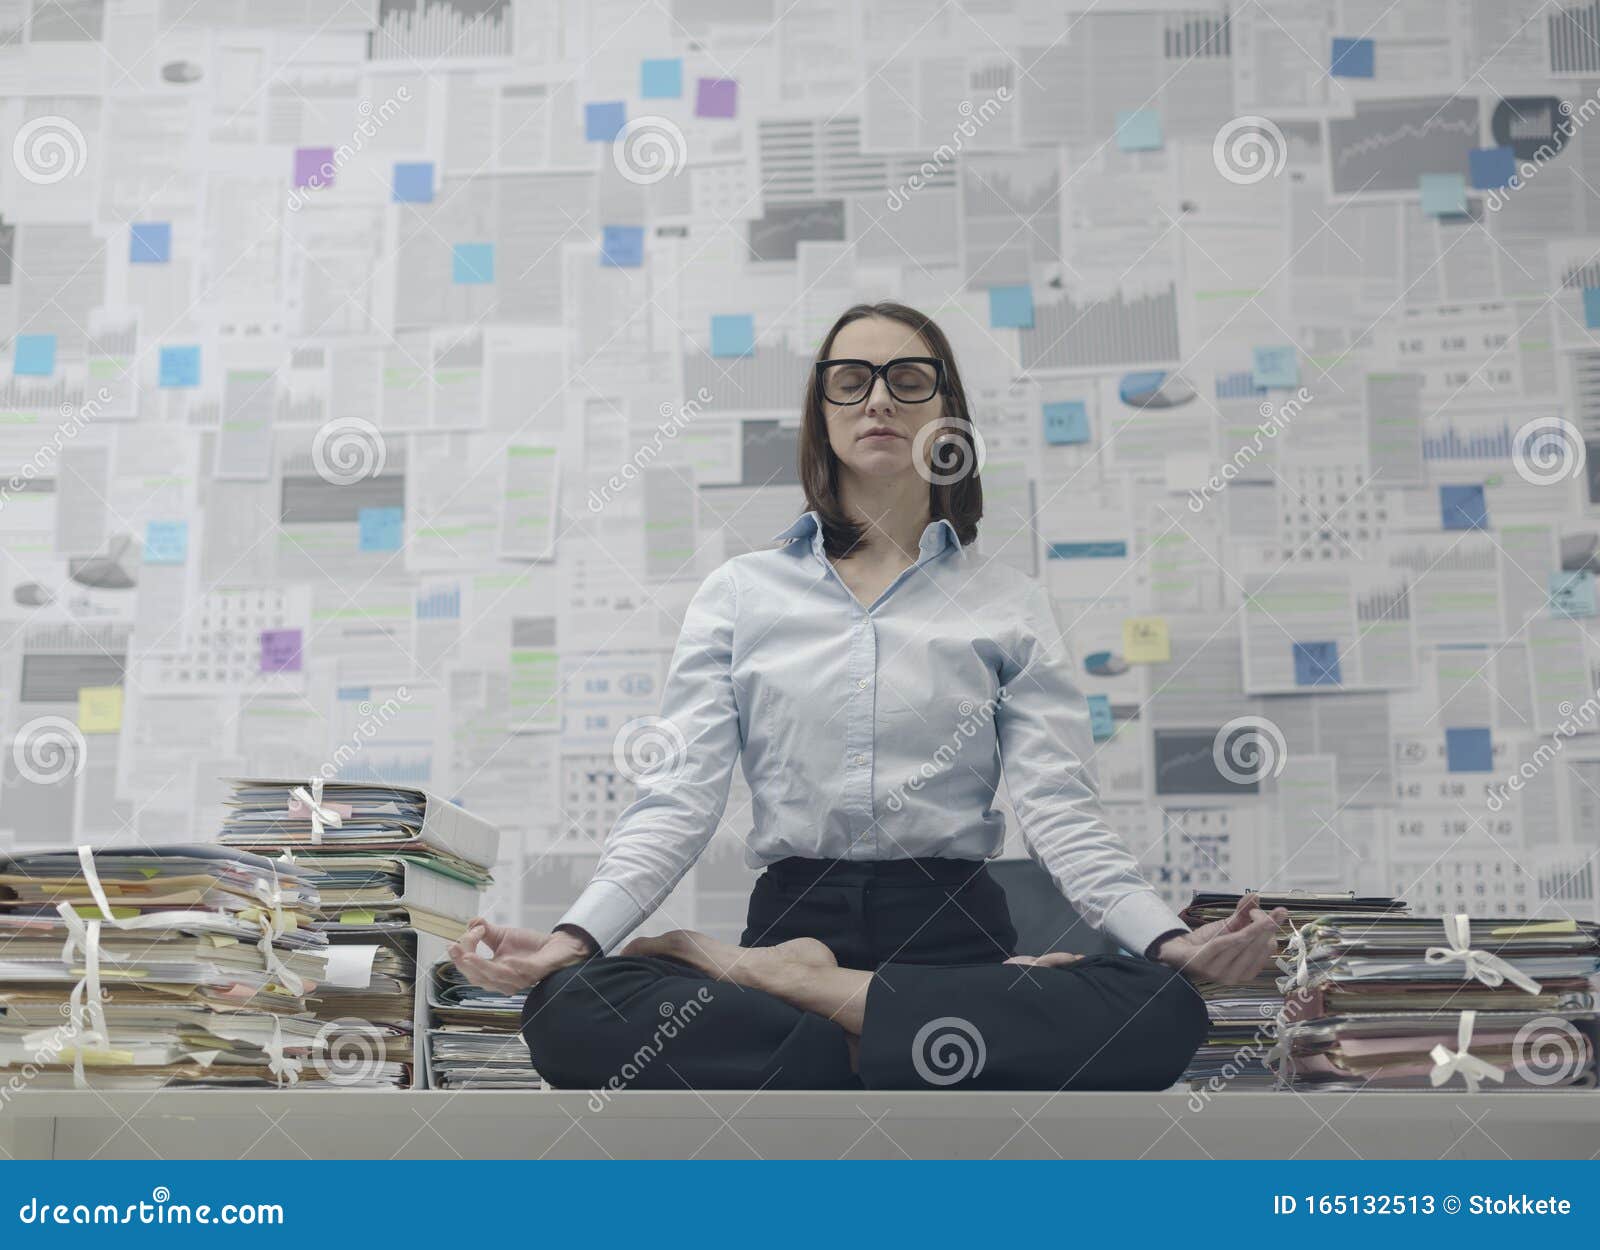 Corporate Businesswoman Practicing Meditation In The Office Stock